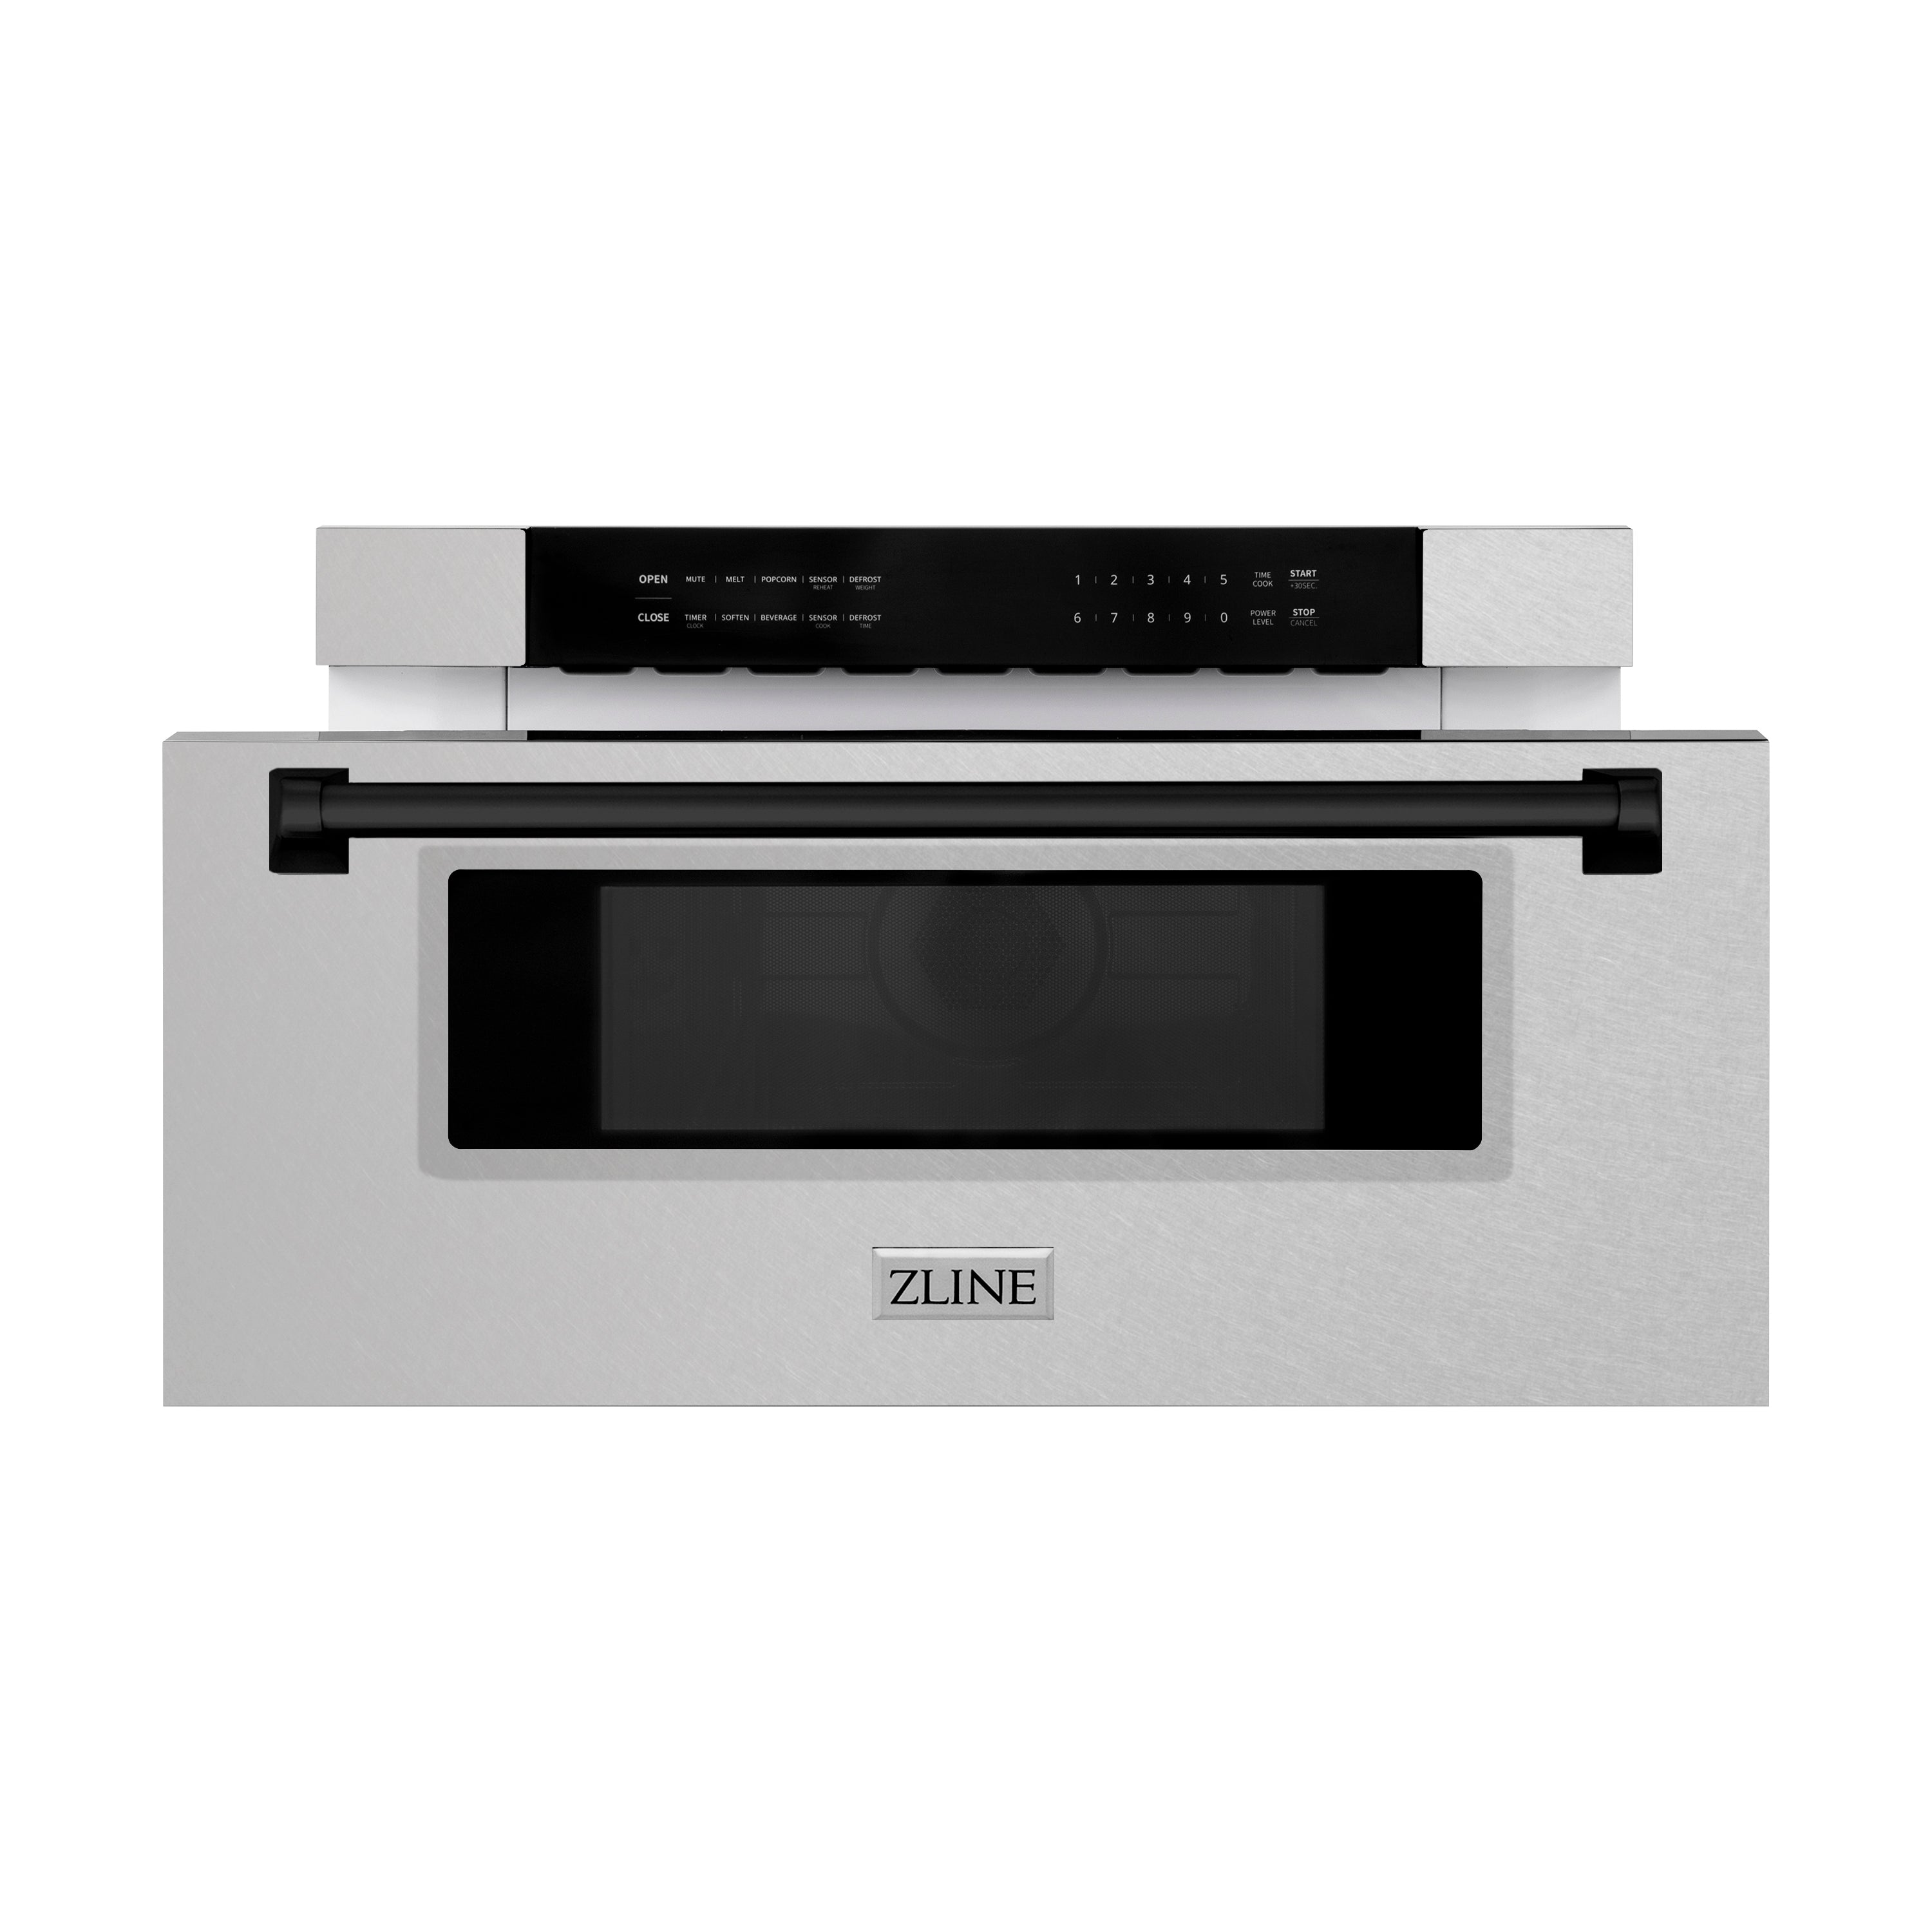 ZLINE Autograph Edition 30" 1.2 cu. ft. Built-In Microwave Drawer in Fingerprint Resistant Stainless Steel with Matte Black Accents